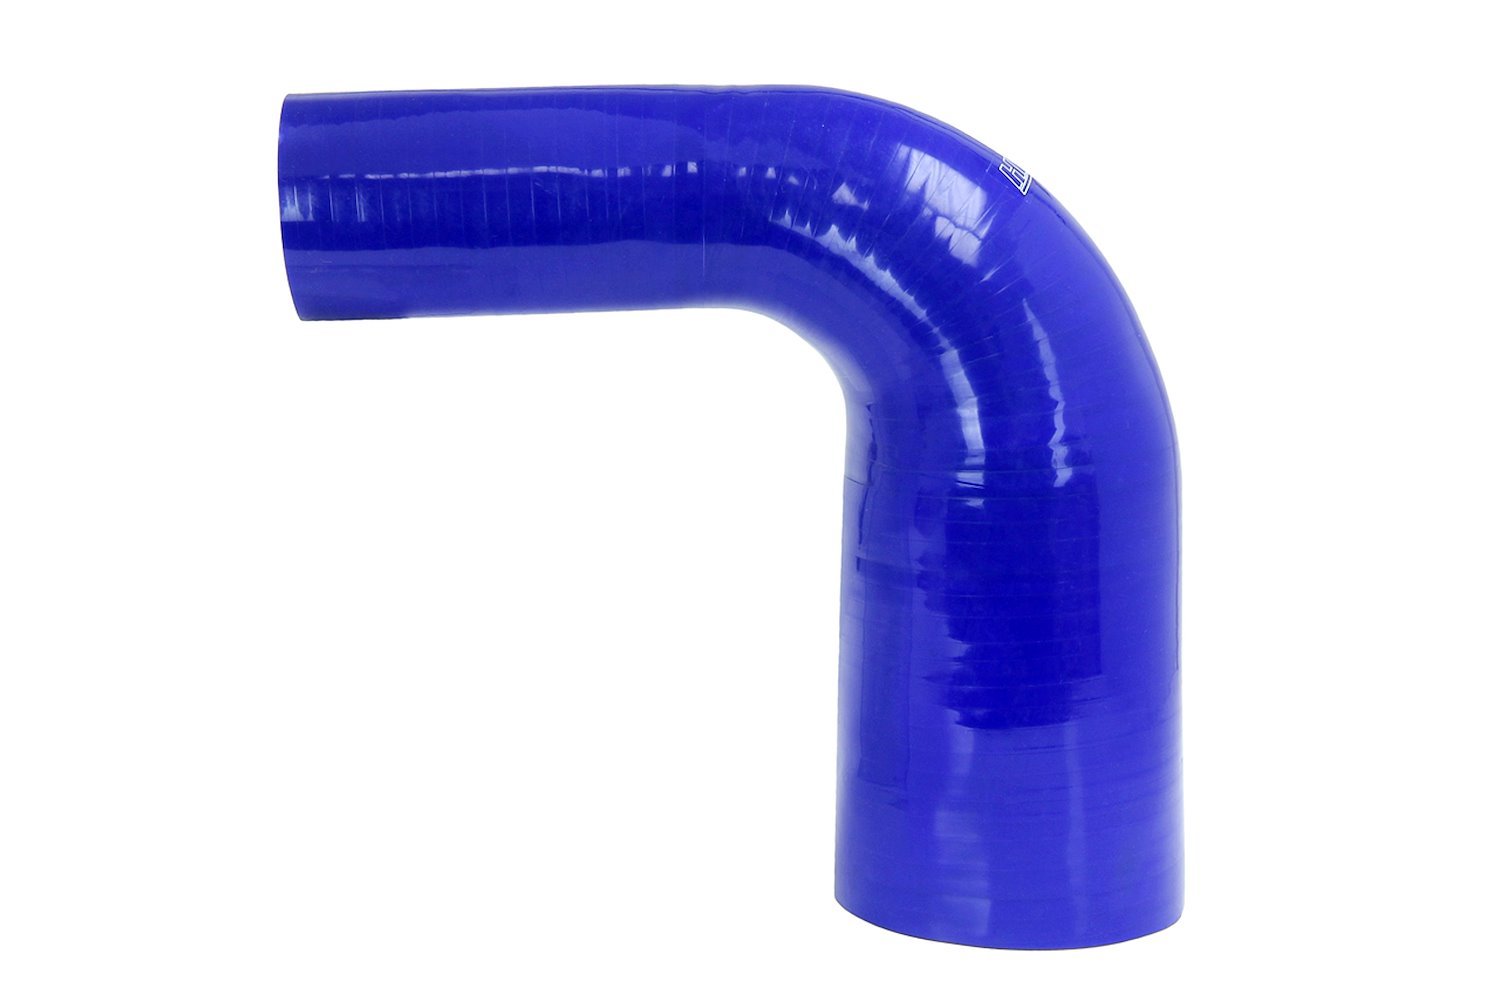 HTSER90-238-300-BLUE Silicone 90-Degree Elbow Hose, High-Temp 4-Ply Reinforced, 2-3/8 in. - 3 in. ID, Blue